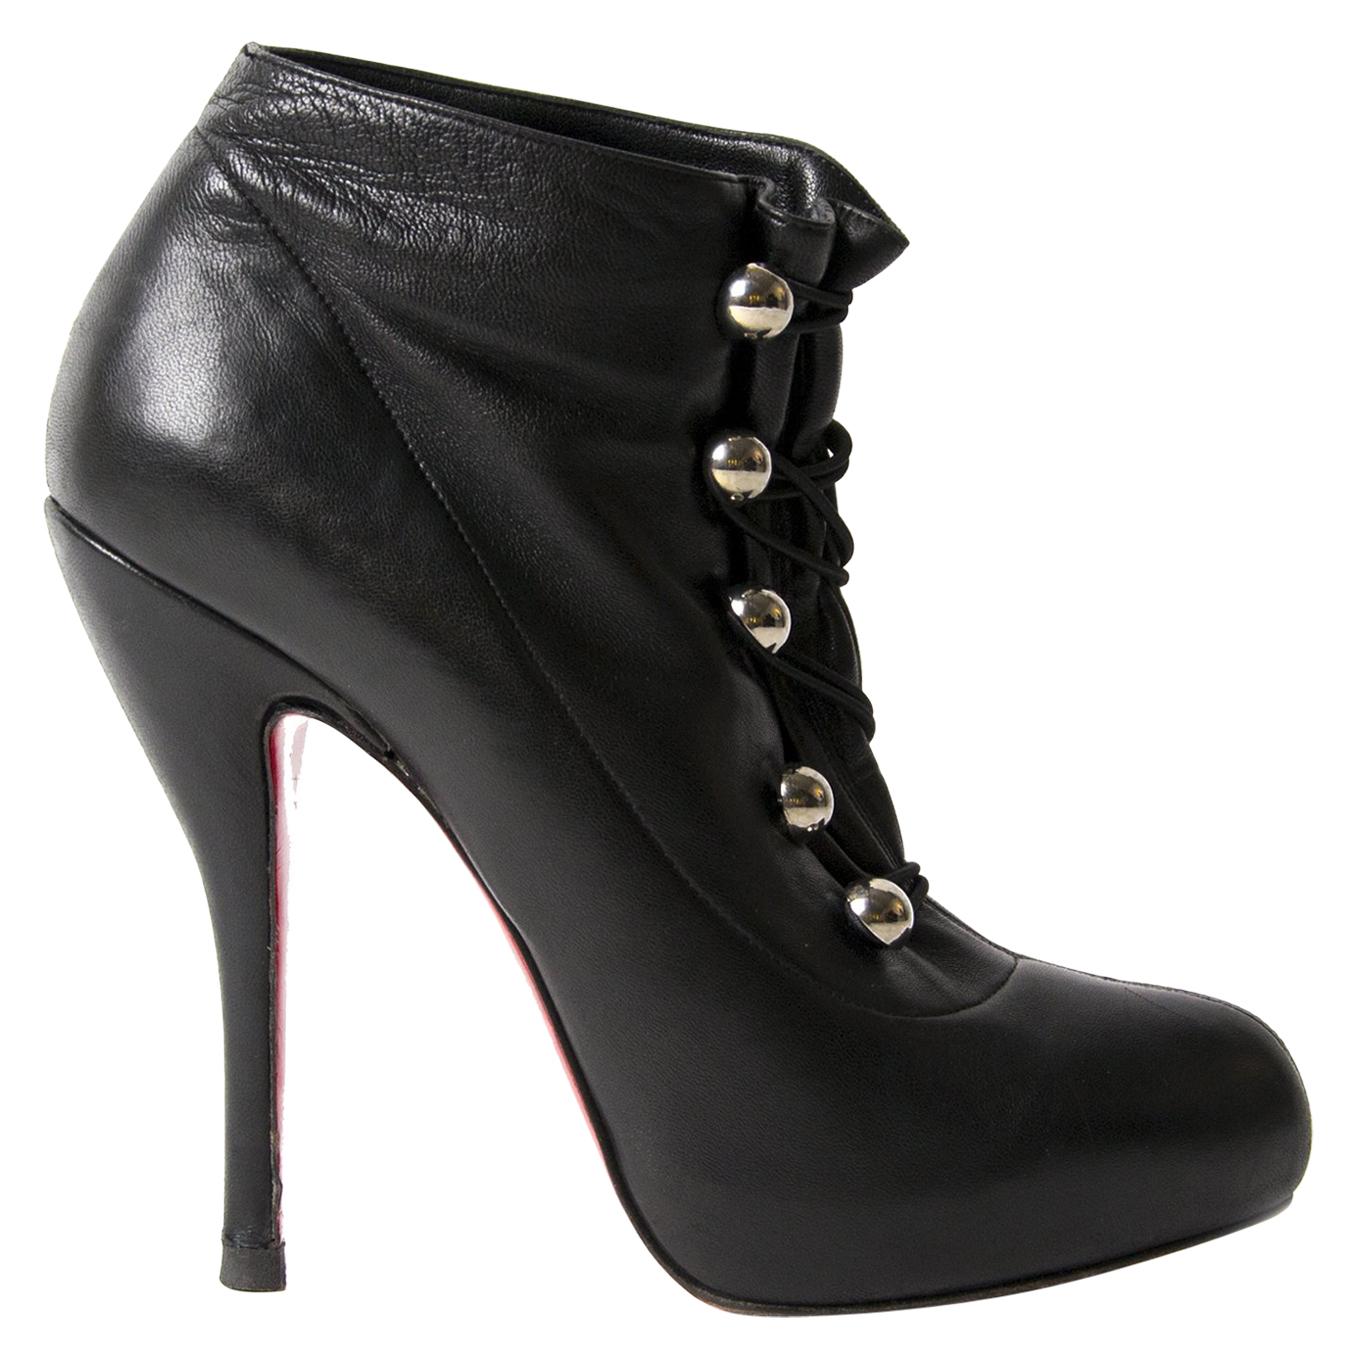 Leather ankle boots Christian Louboutin Black size 35.5 EU in Leather -  25307782